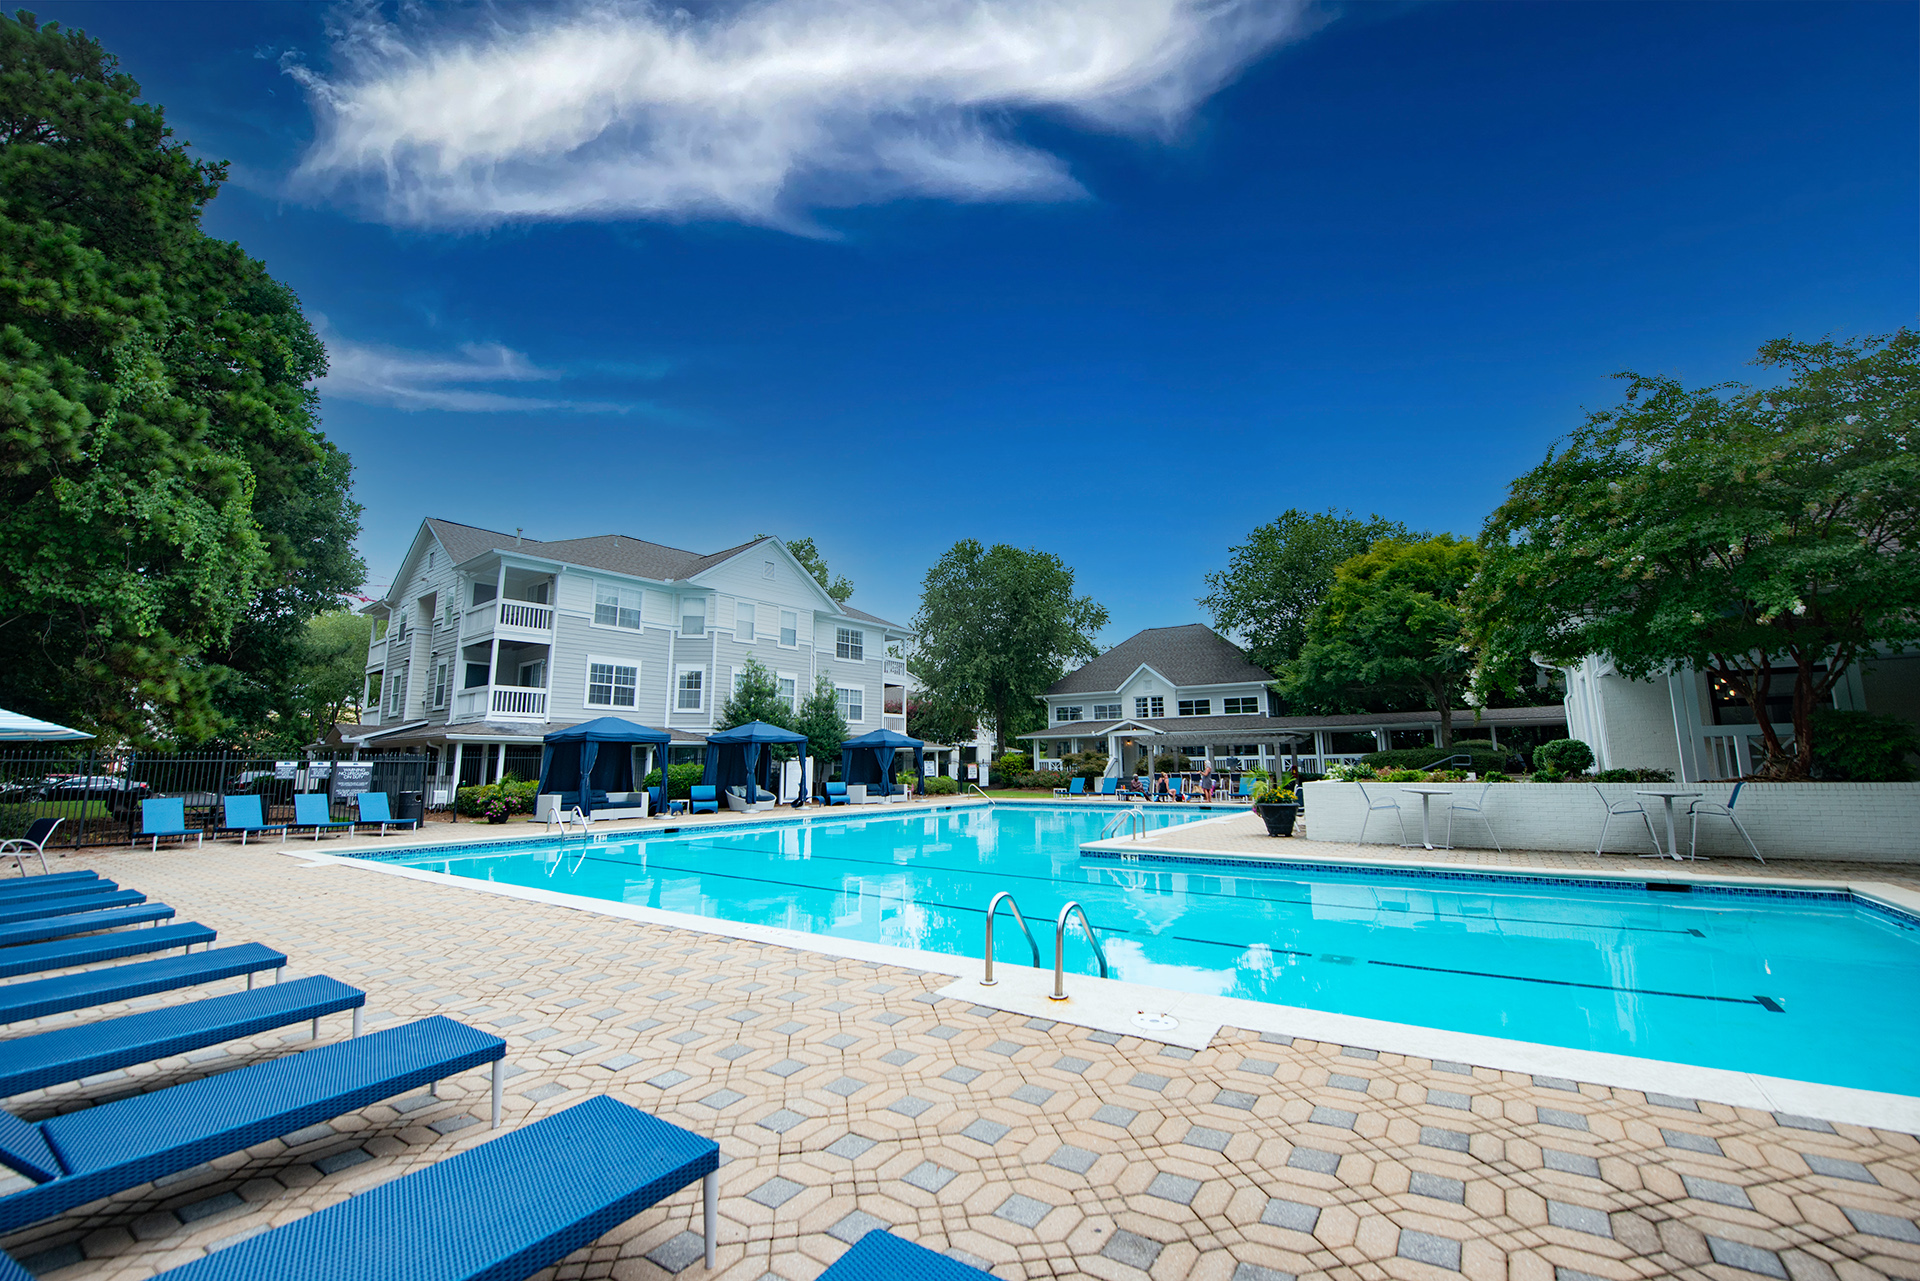 Swimming Pool with Sundeck at Wildwood Ridge Apartments